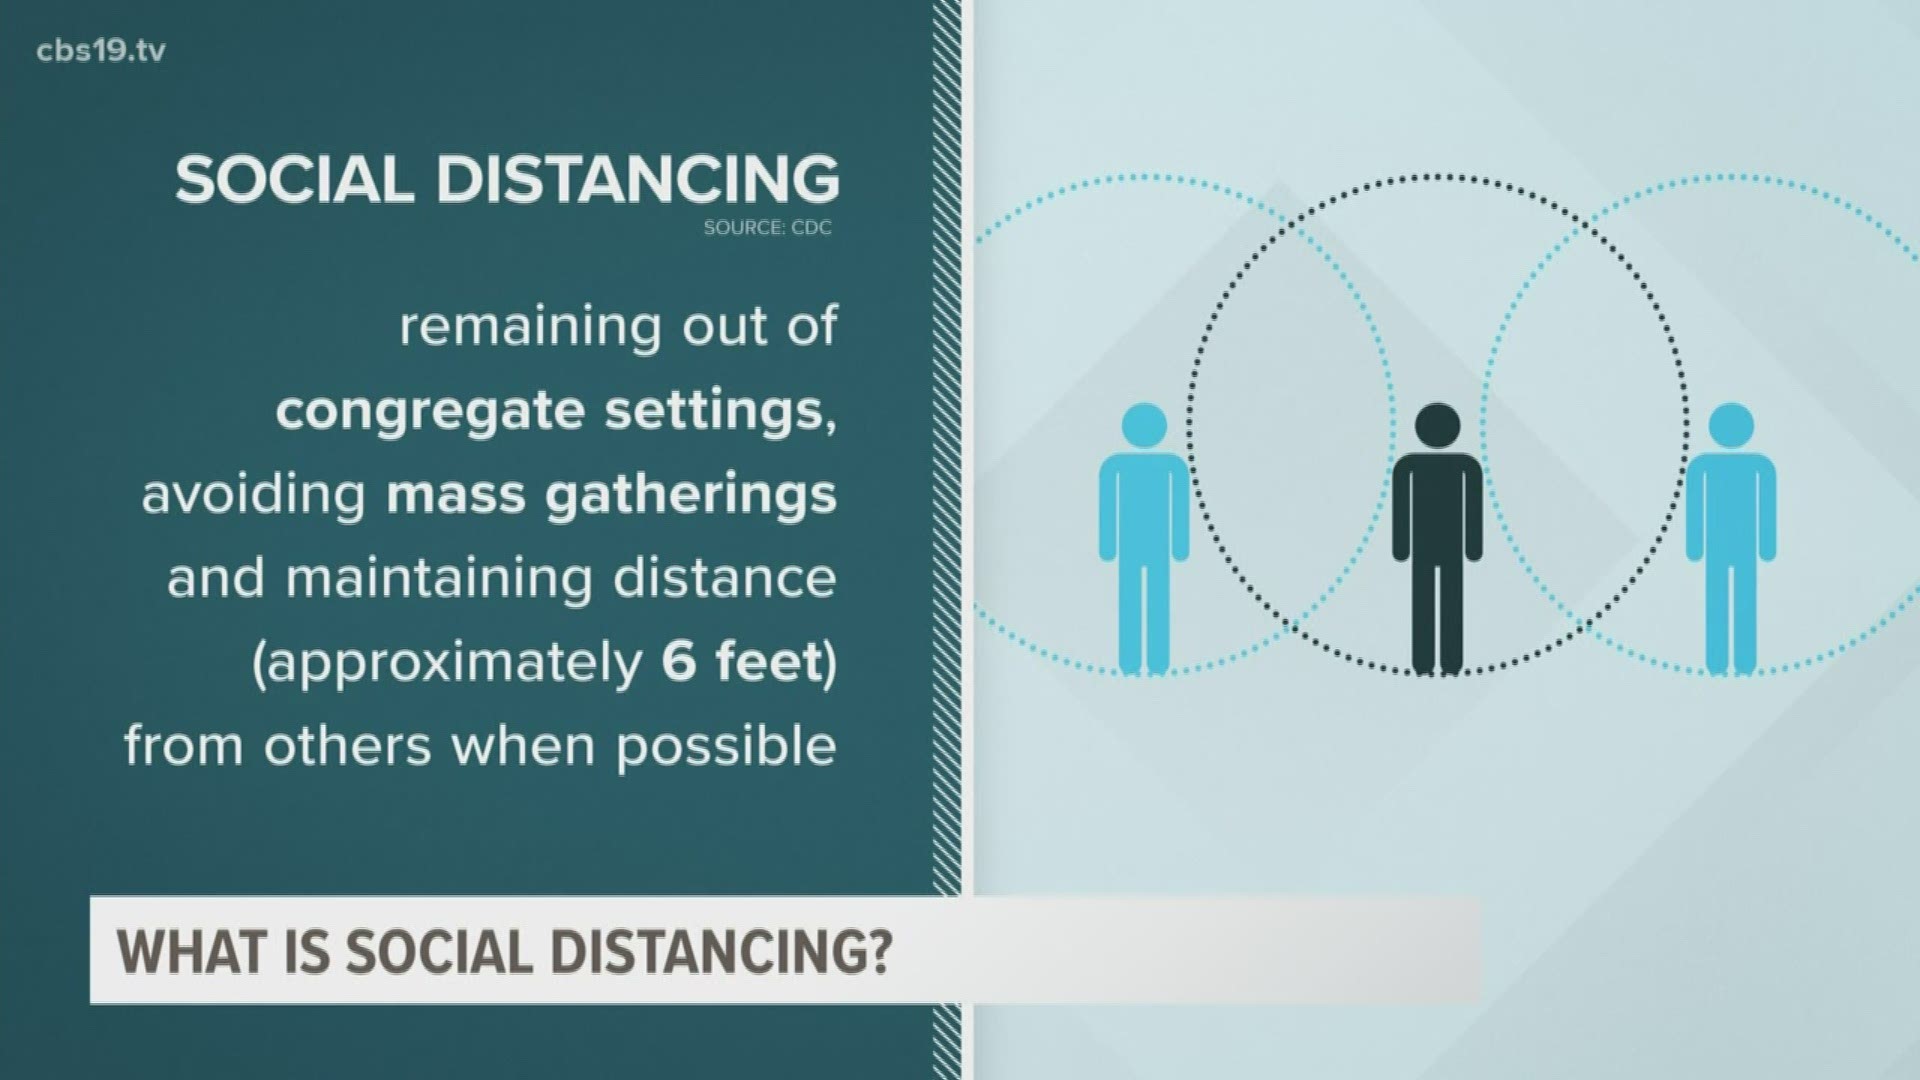 "Social Distancing" is just one of the tips the CDC recommends that could help prevent the spread of the coronavirus.